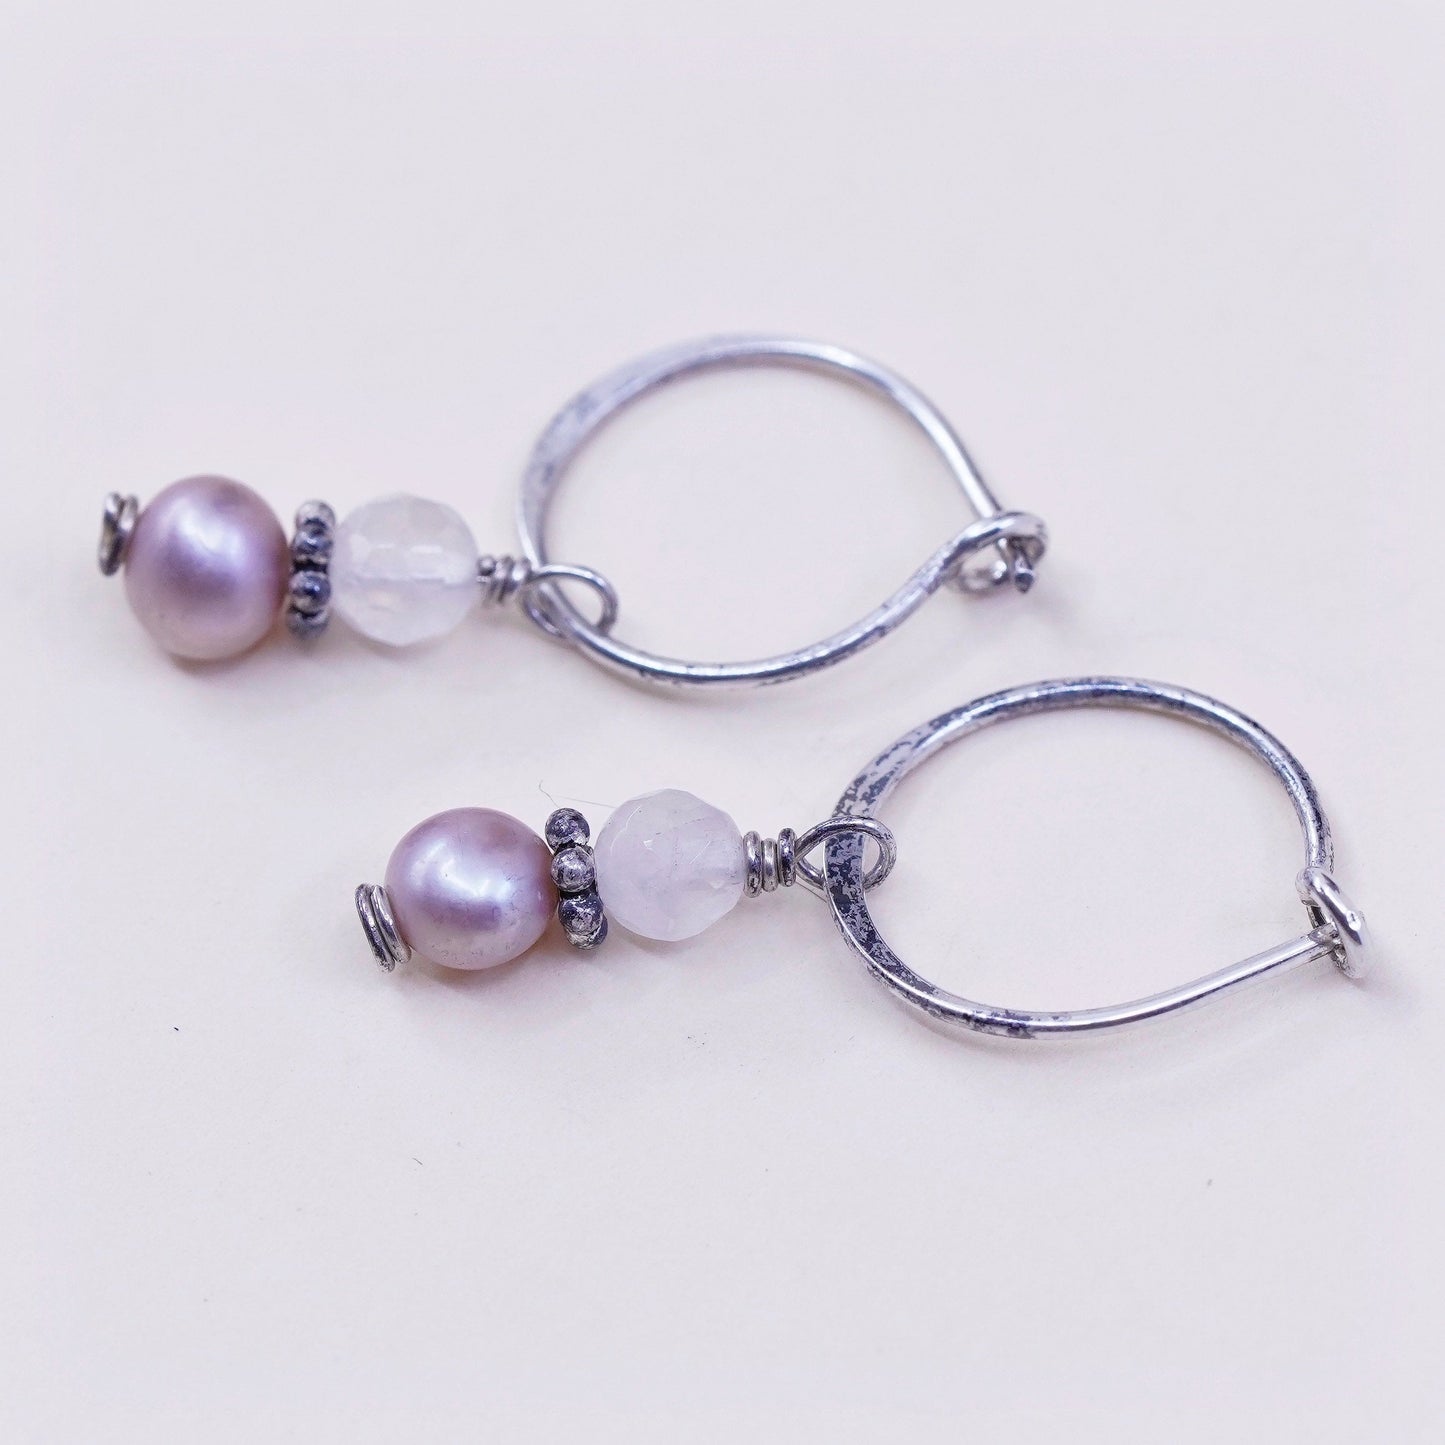 0.5”, Vintage sterling 925 silver earrings, minimalist primitive hoops with pink pearl and crystal, silver tested